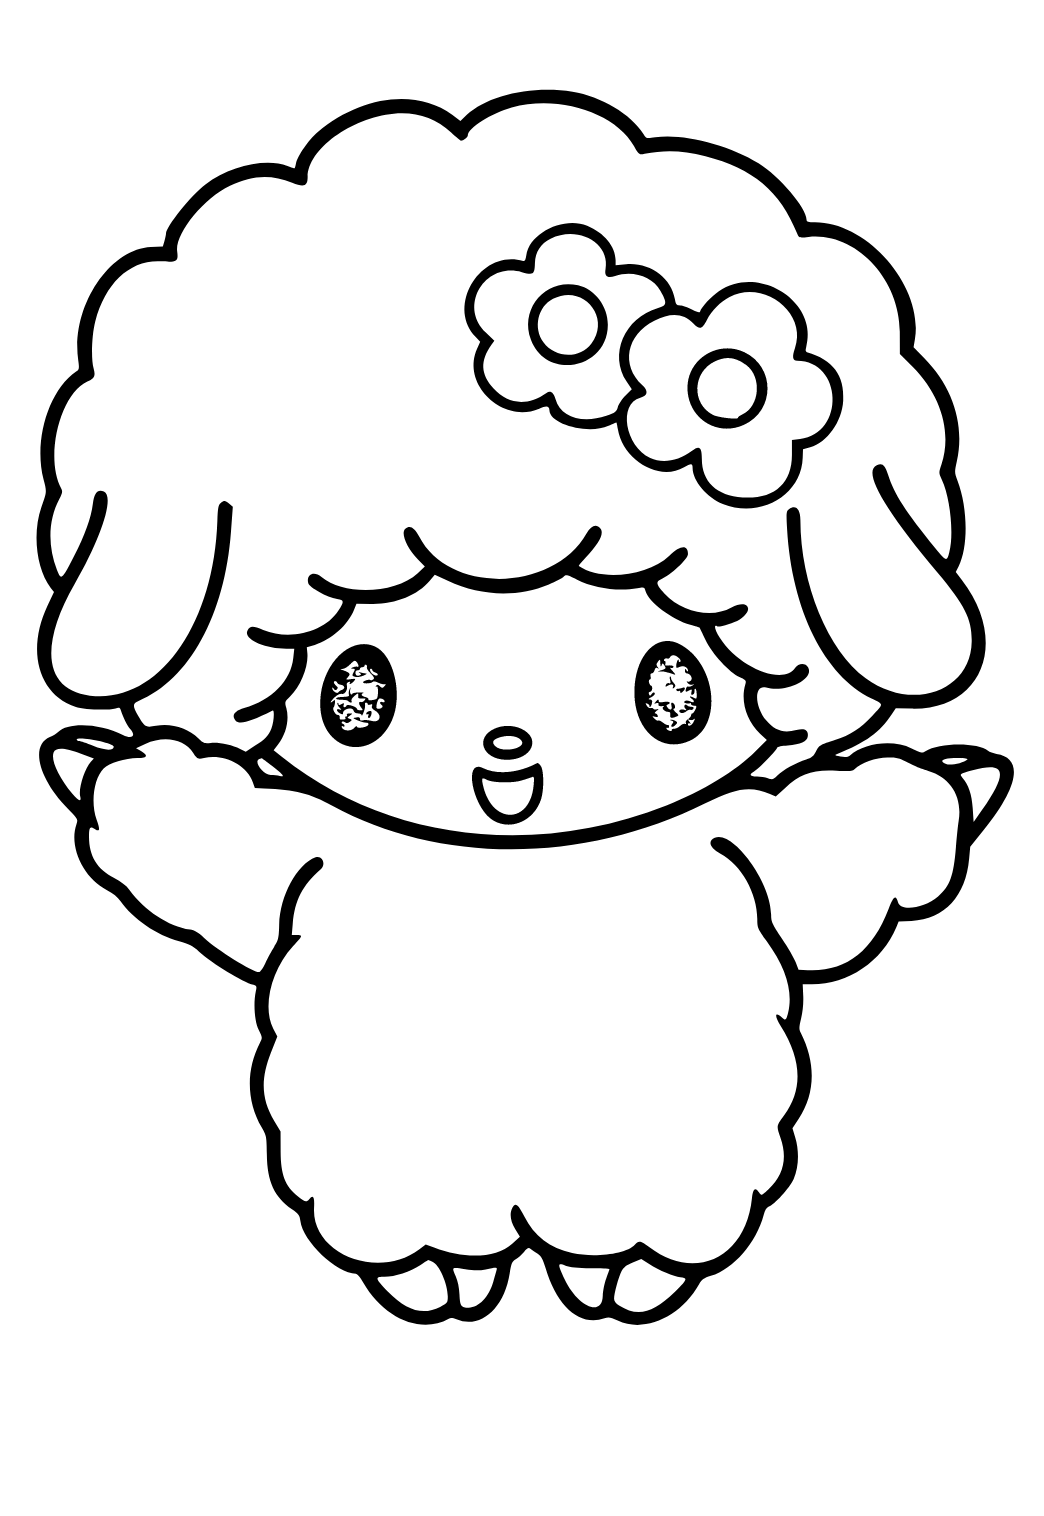 Free Printable My Melody Lamb Coloring Page, Sheet and Picture for Adults  and Kids (Girls and Boys) - Babeled.com